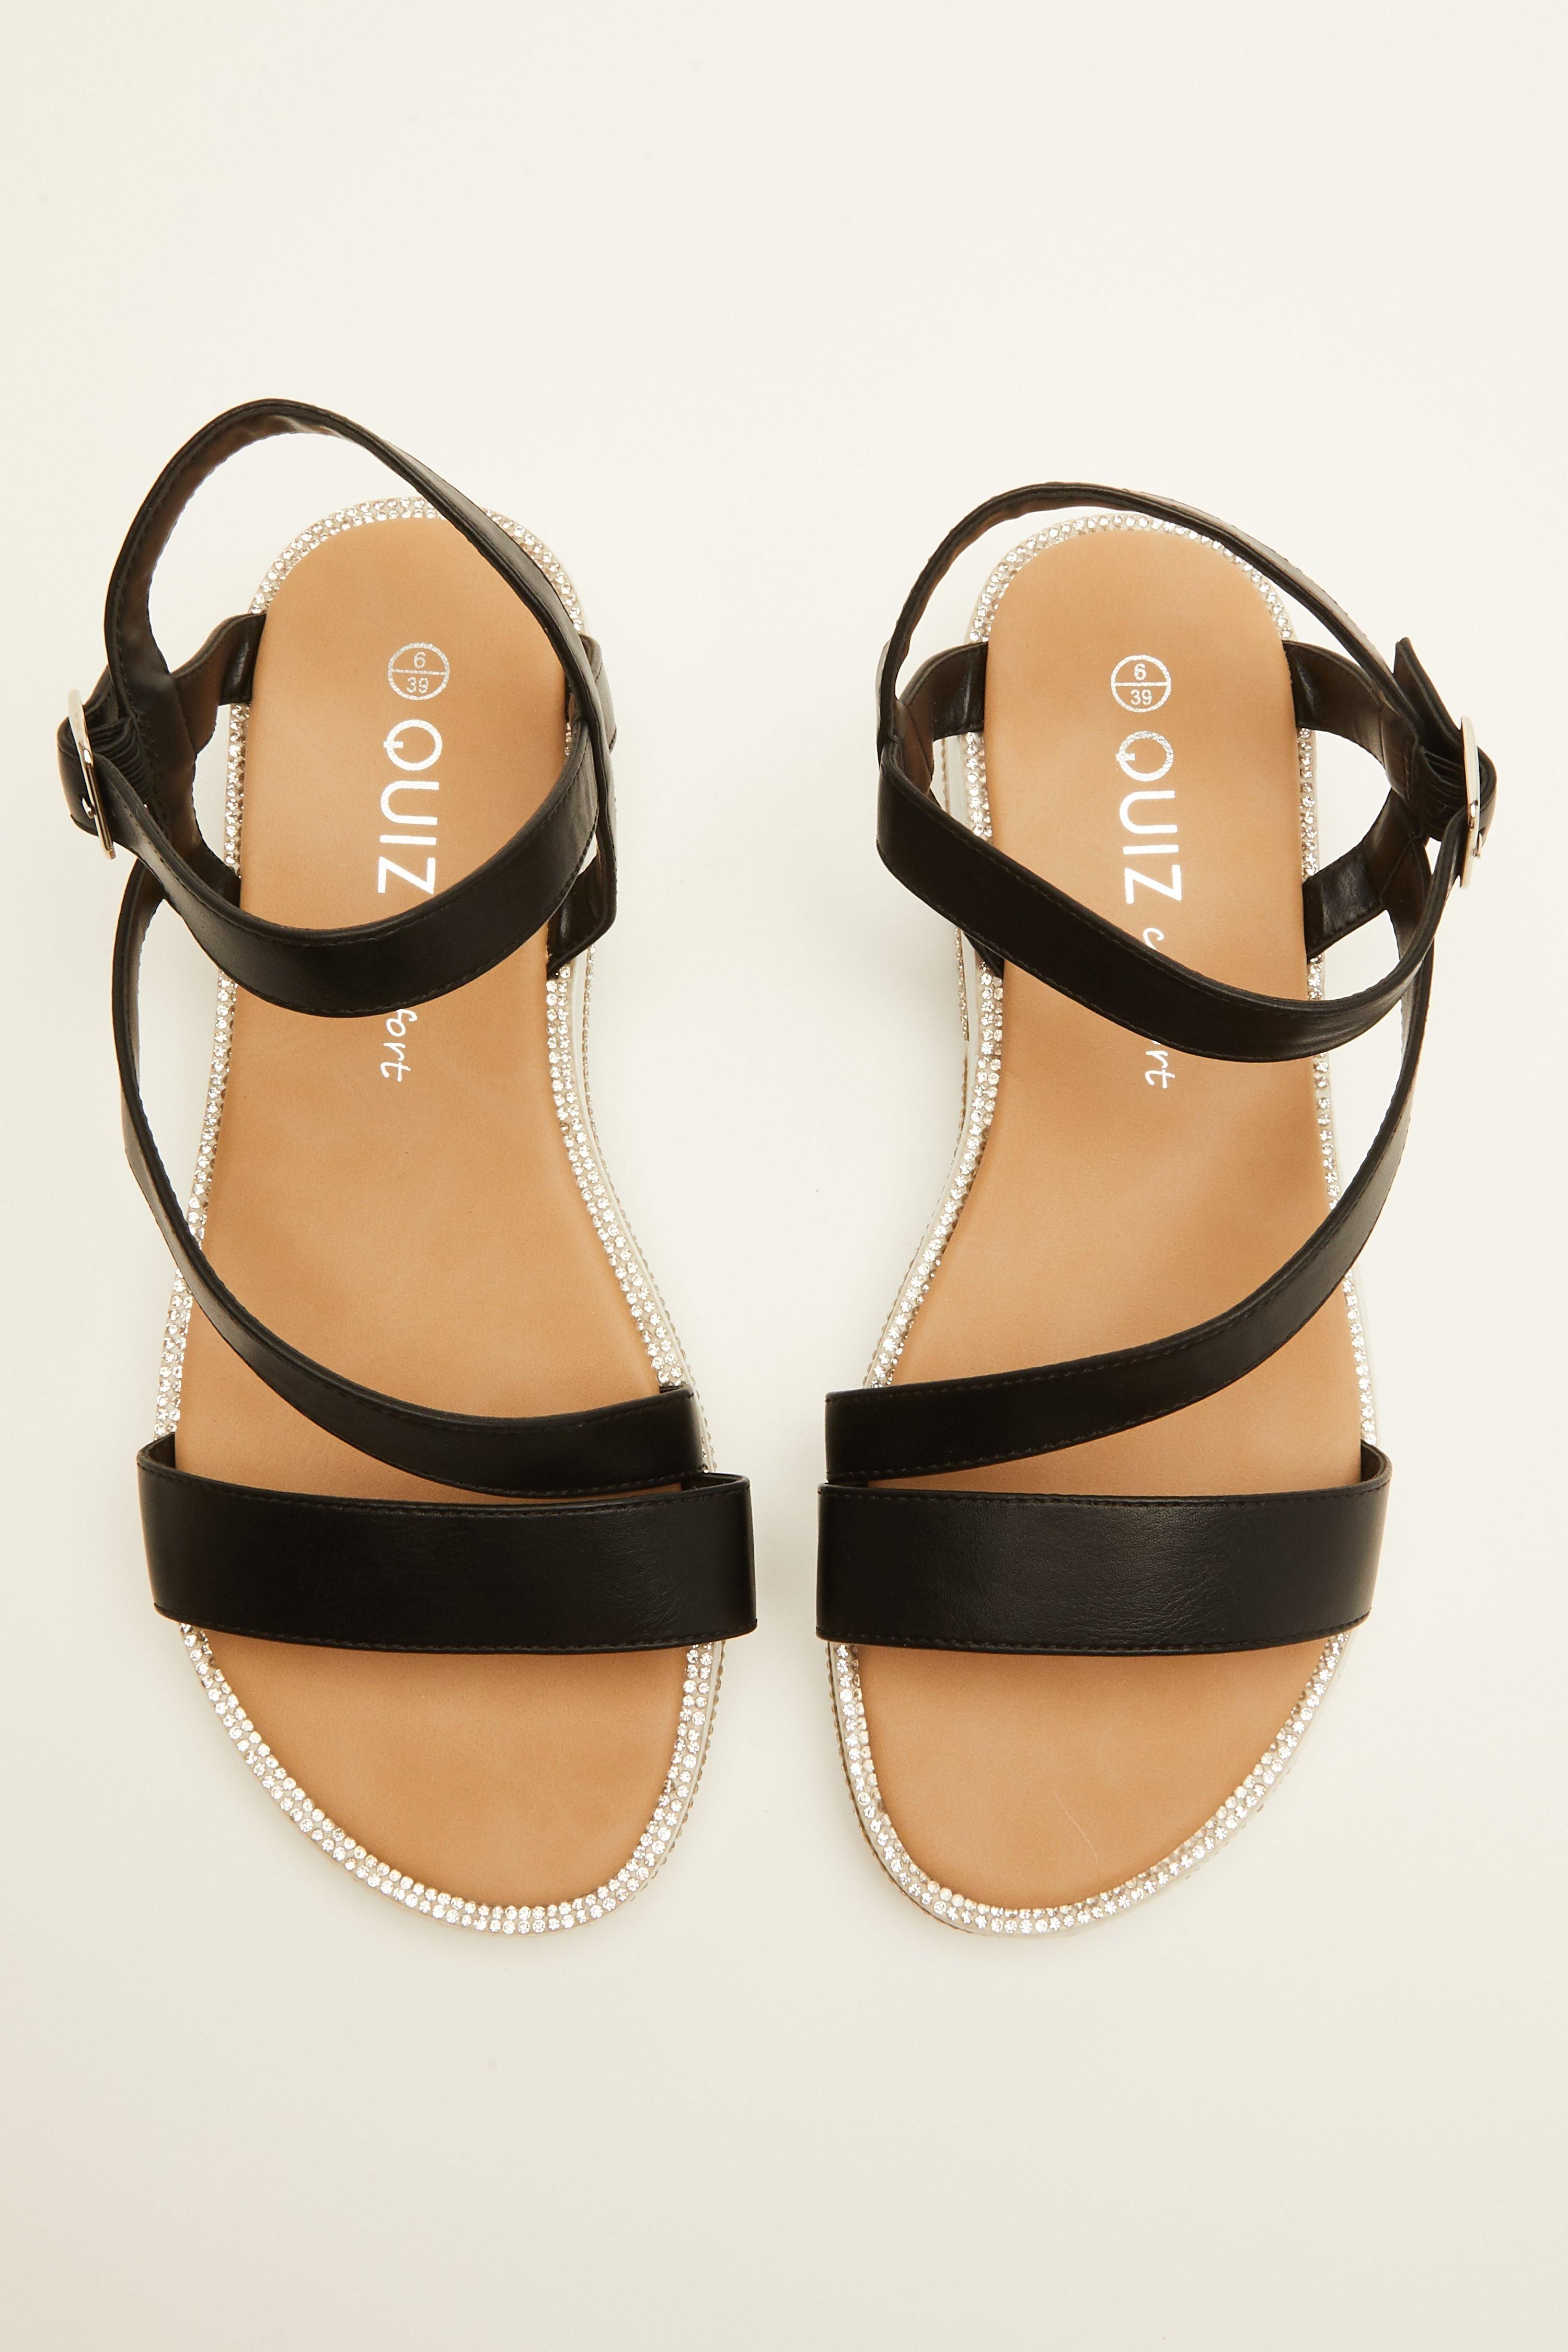 - Platform wedge  - Faux leather   - Asymmetric straps   - Embellished sole   - Heel height: 1.5